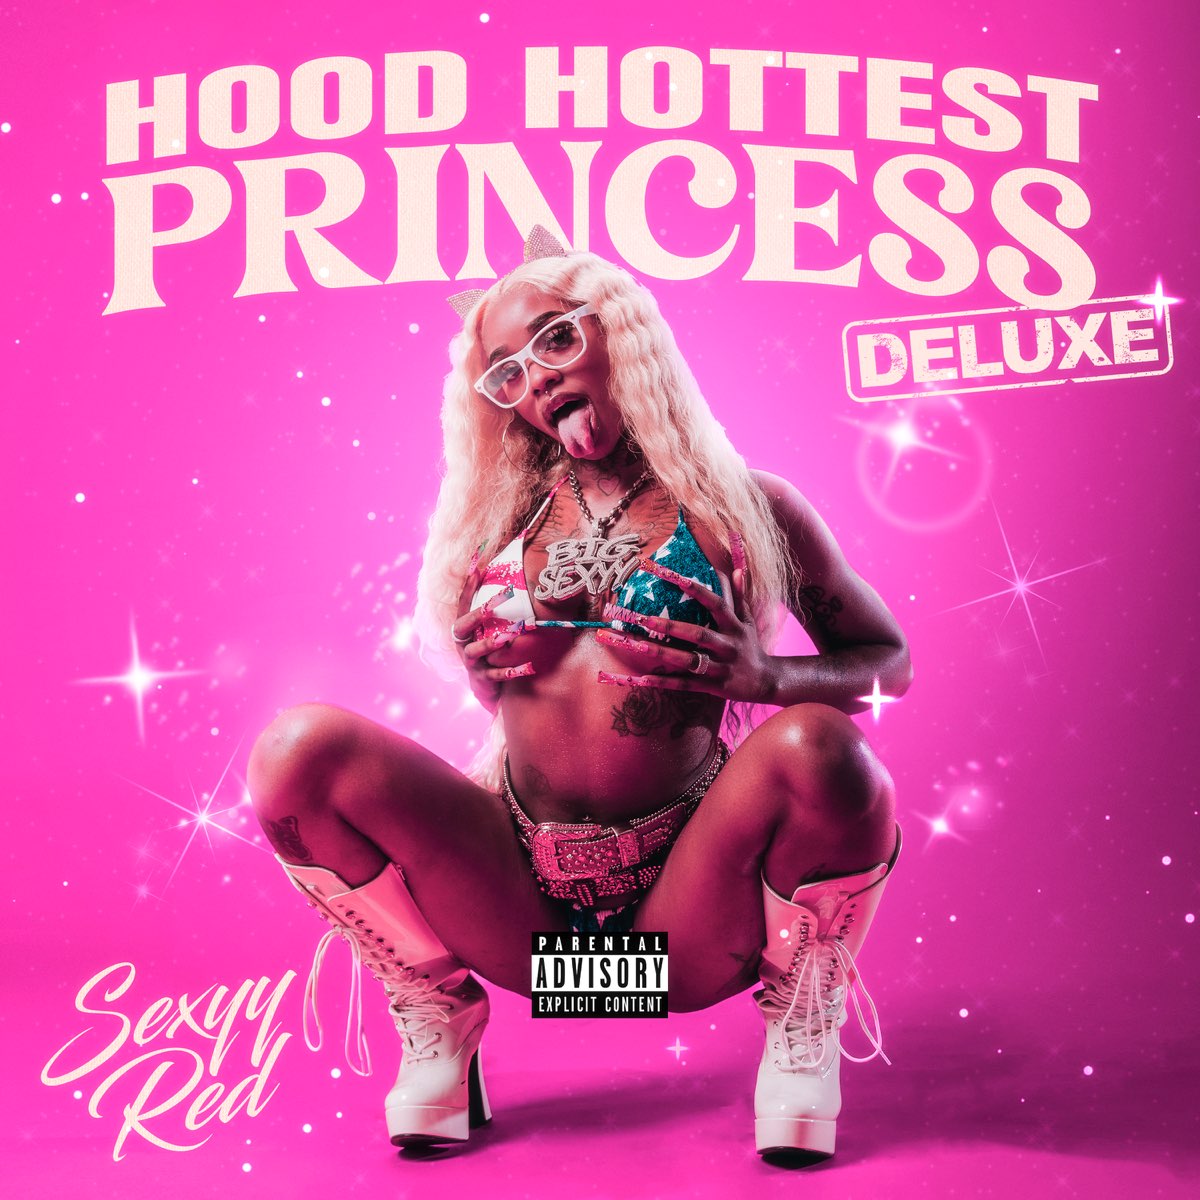 Sexyy Red Hood Hottest Princess (Deluxe) cover artwork